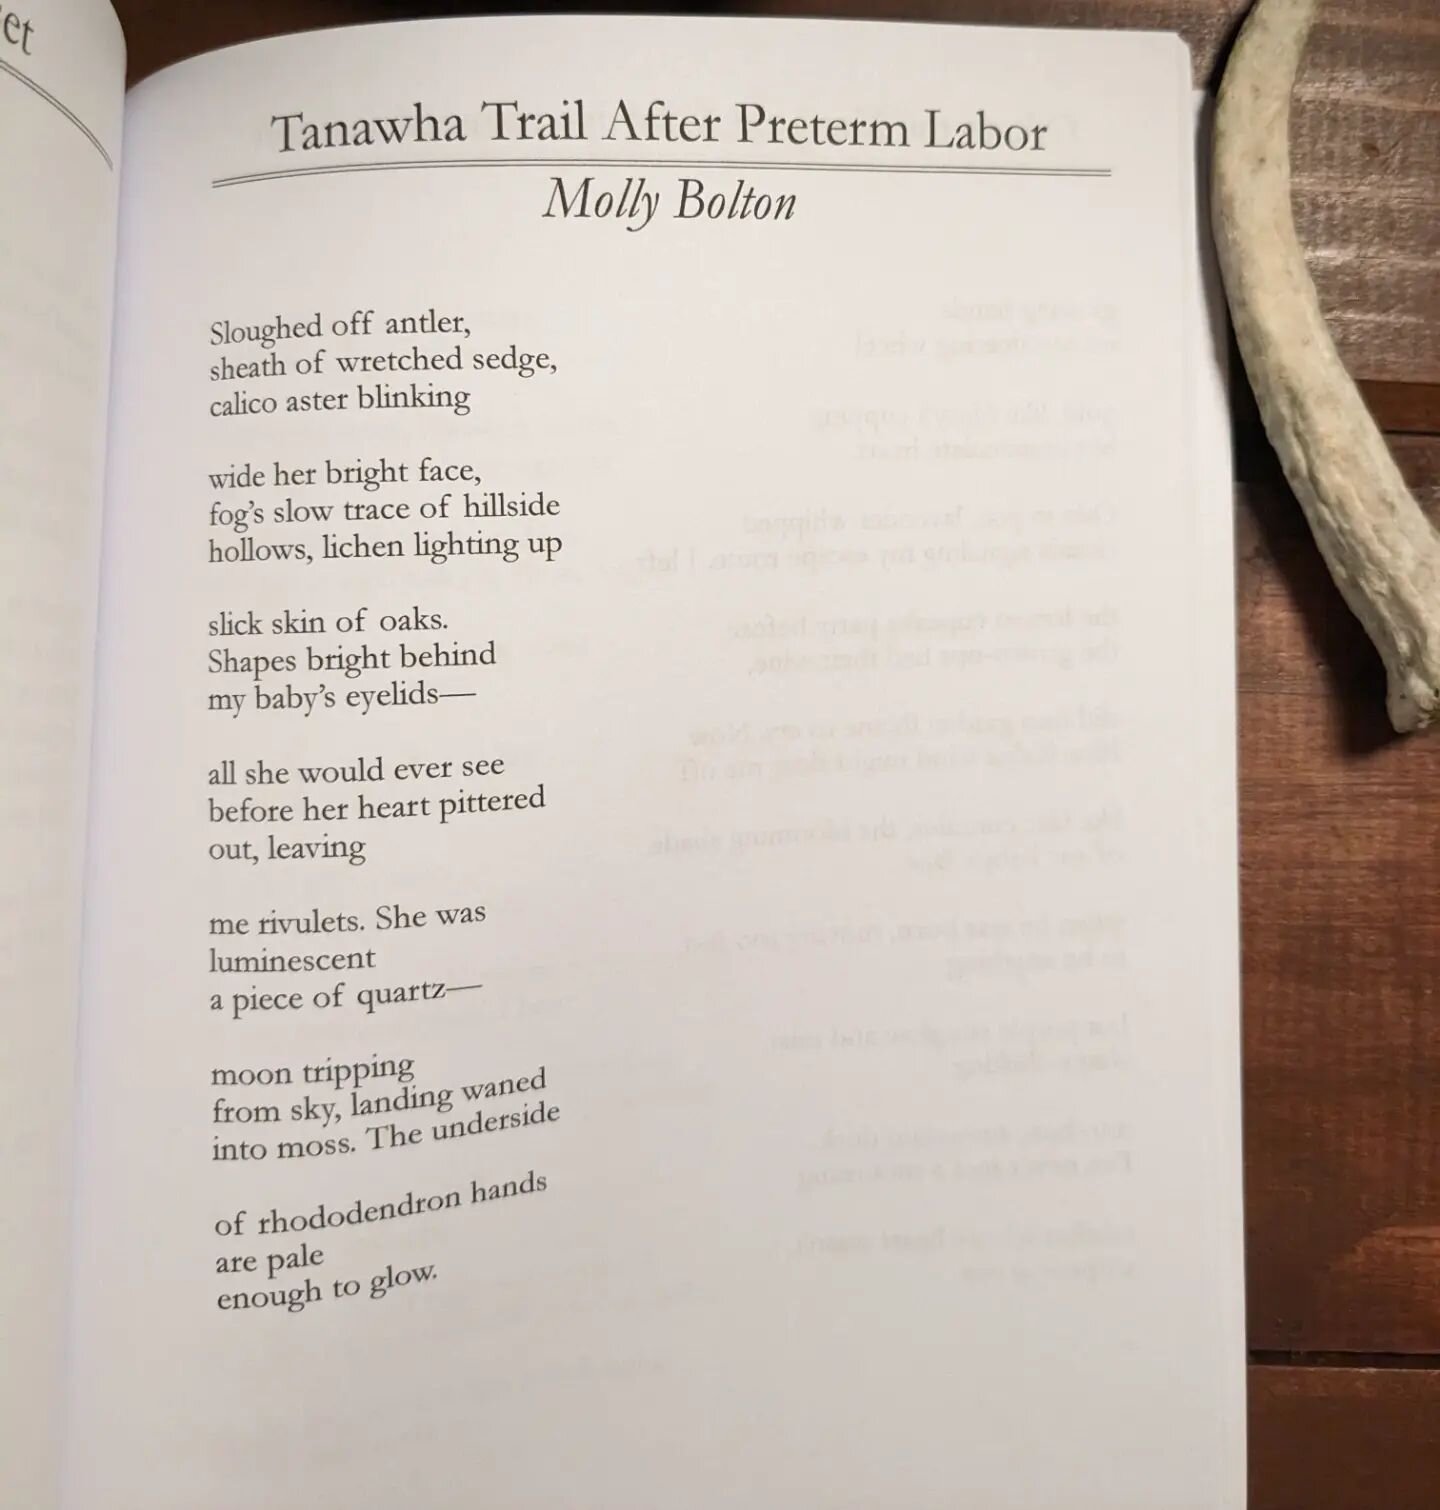 Poem from the NC Gilbert-Chappell Distinguish Poets Series.